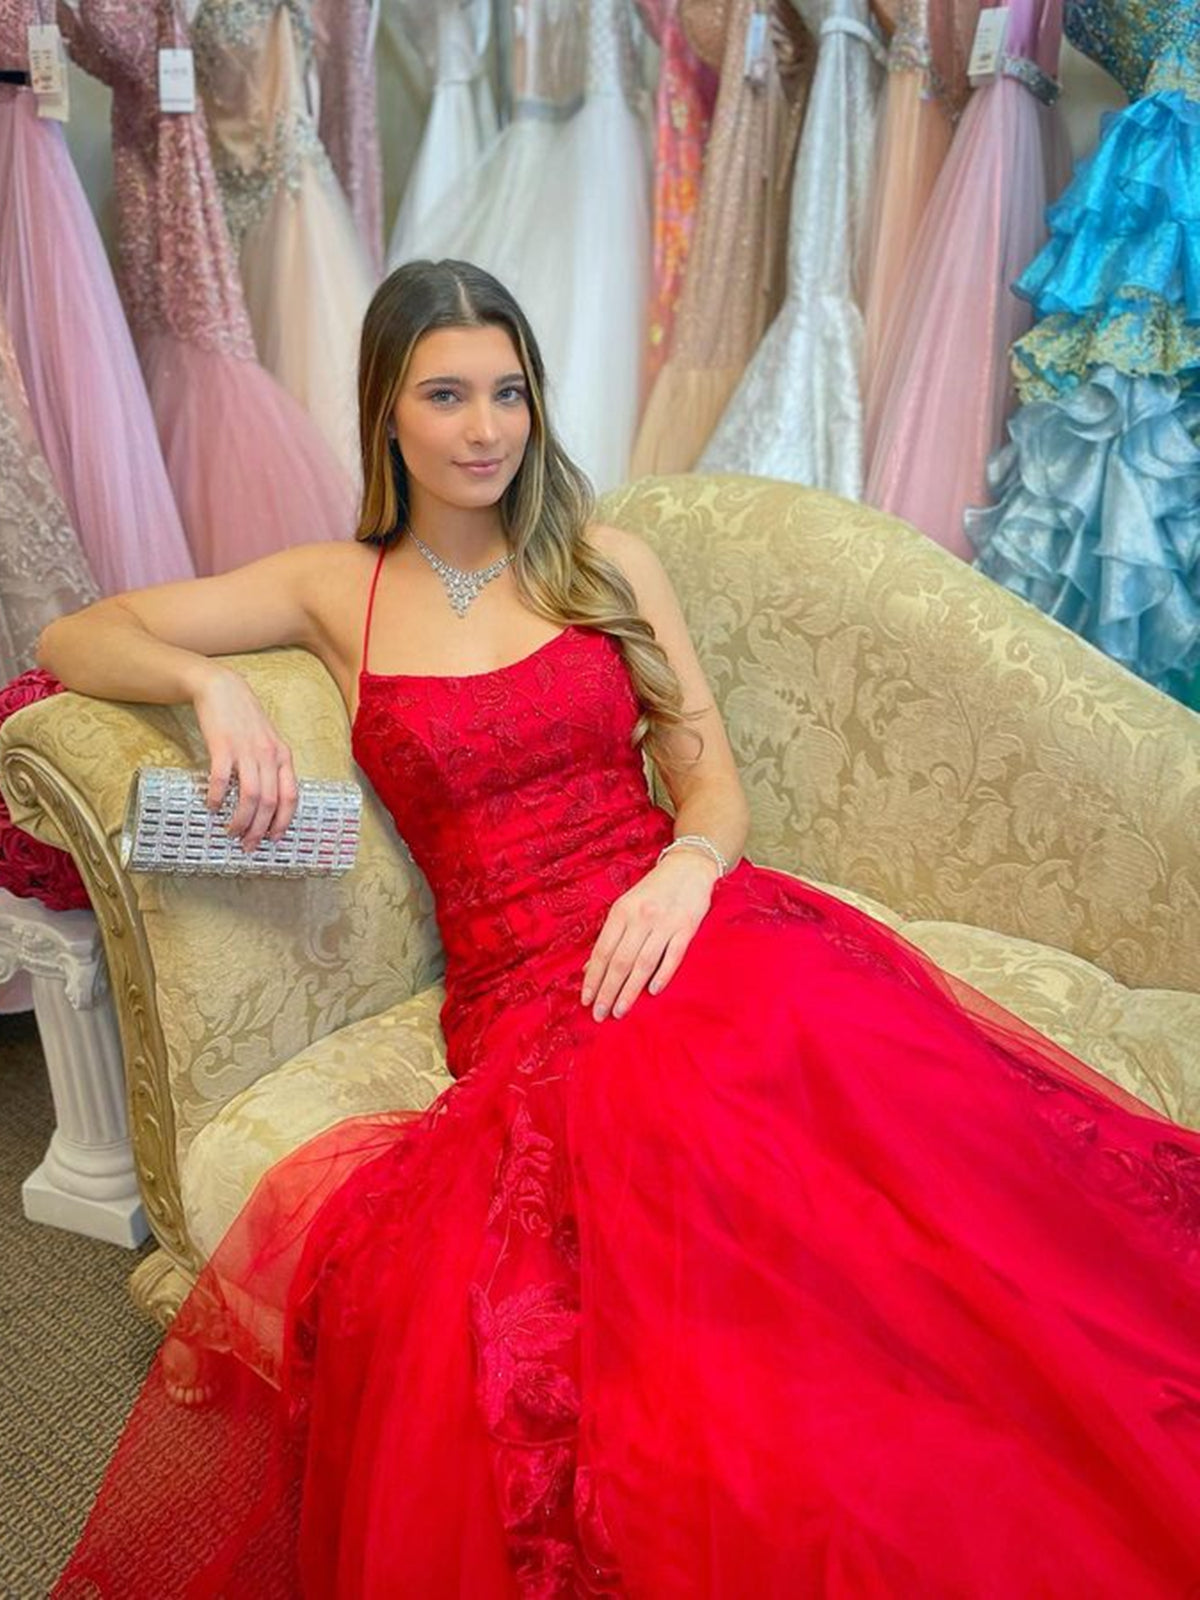 Long Mermaid Spaghetti Straps Tulle Lace Open Back Prom Dress Red Formal Evening Gowns-BIZTUNNEL